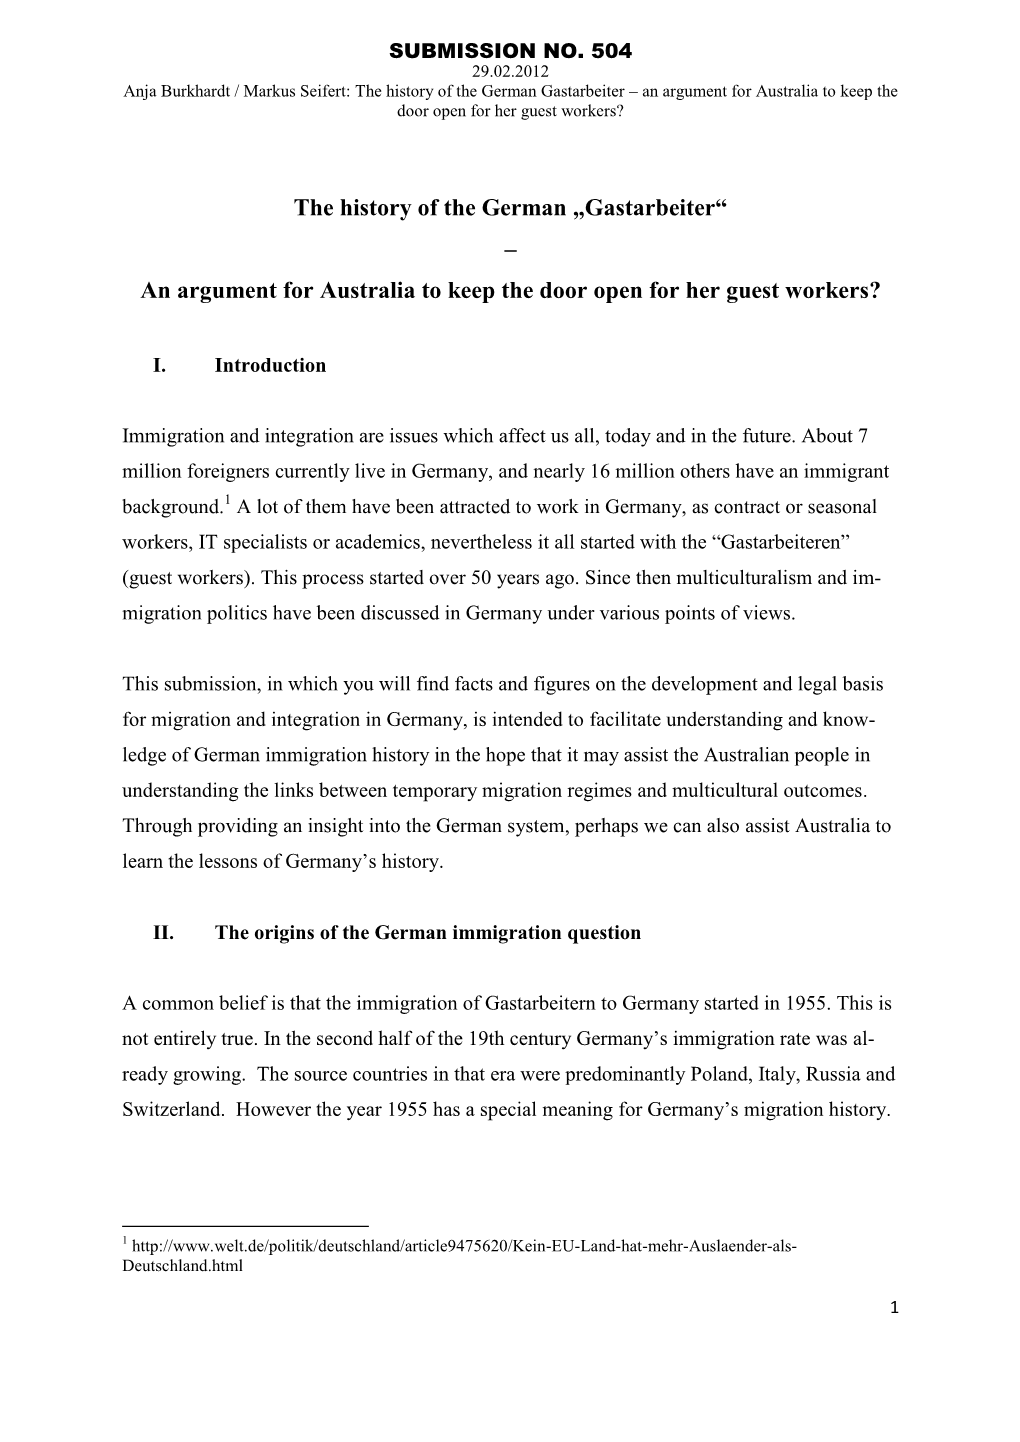 The History of the German „Gastarbeiter“ – an Argument for Australia to Keep the Door Open for Her Guest Workers?